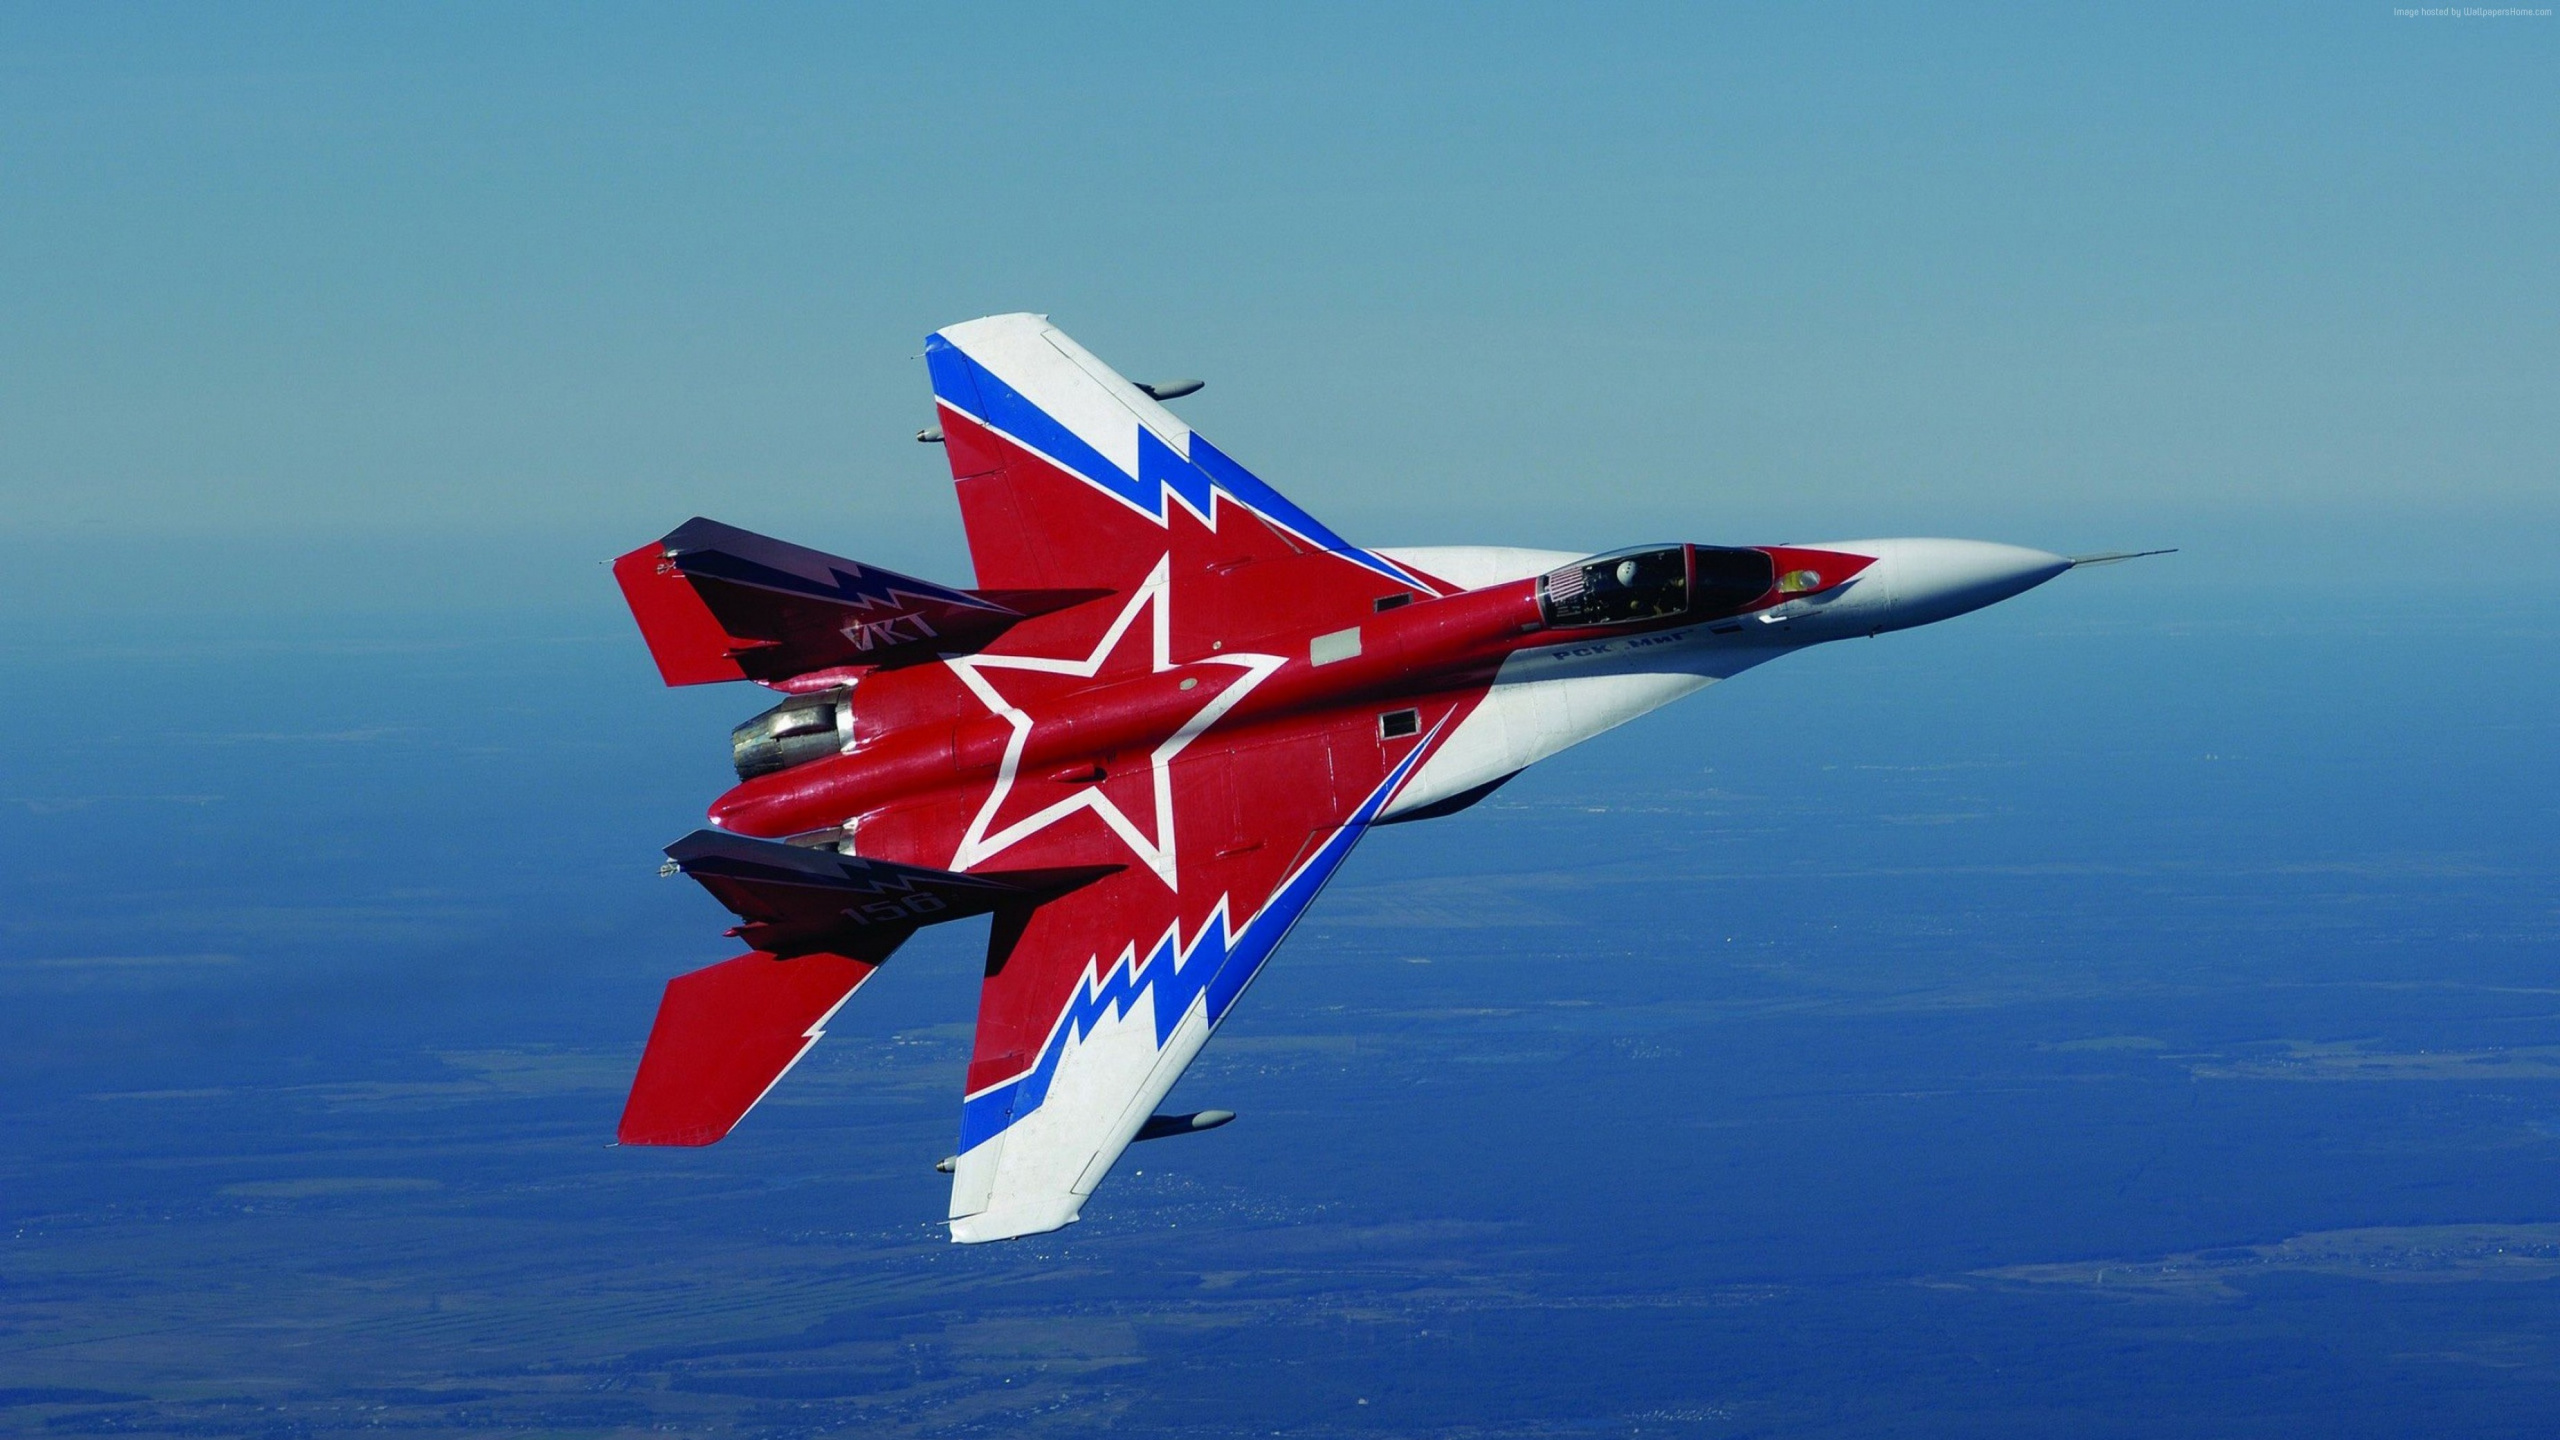 Red and White Jet Plane Flying Over Blue Sky During Daytime. Wallpaper in 2560x1440 Resolution